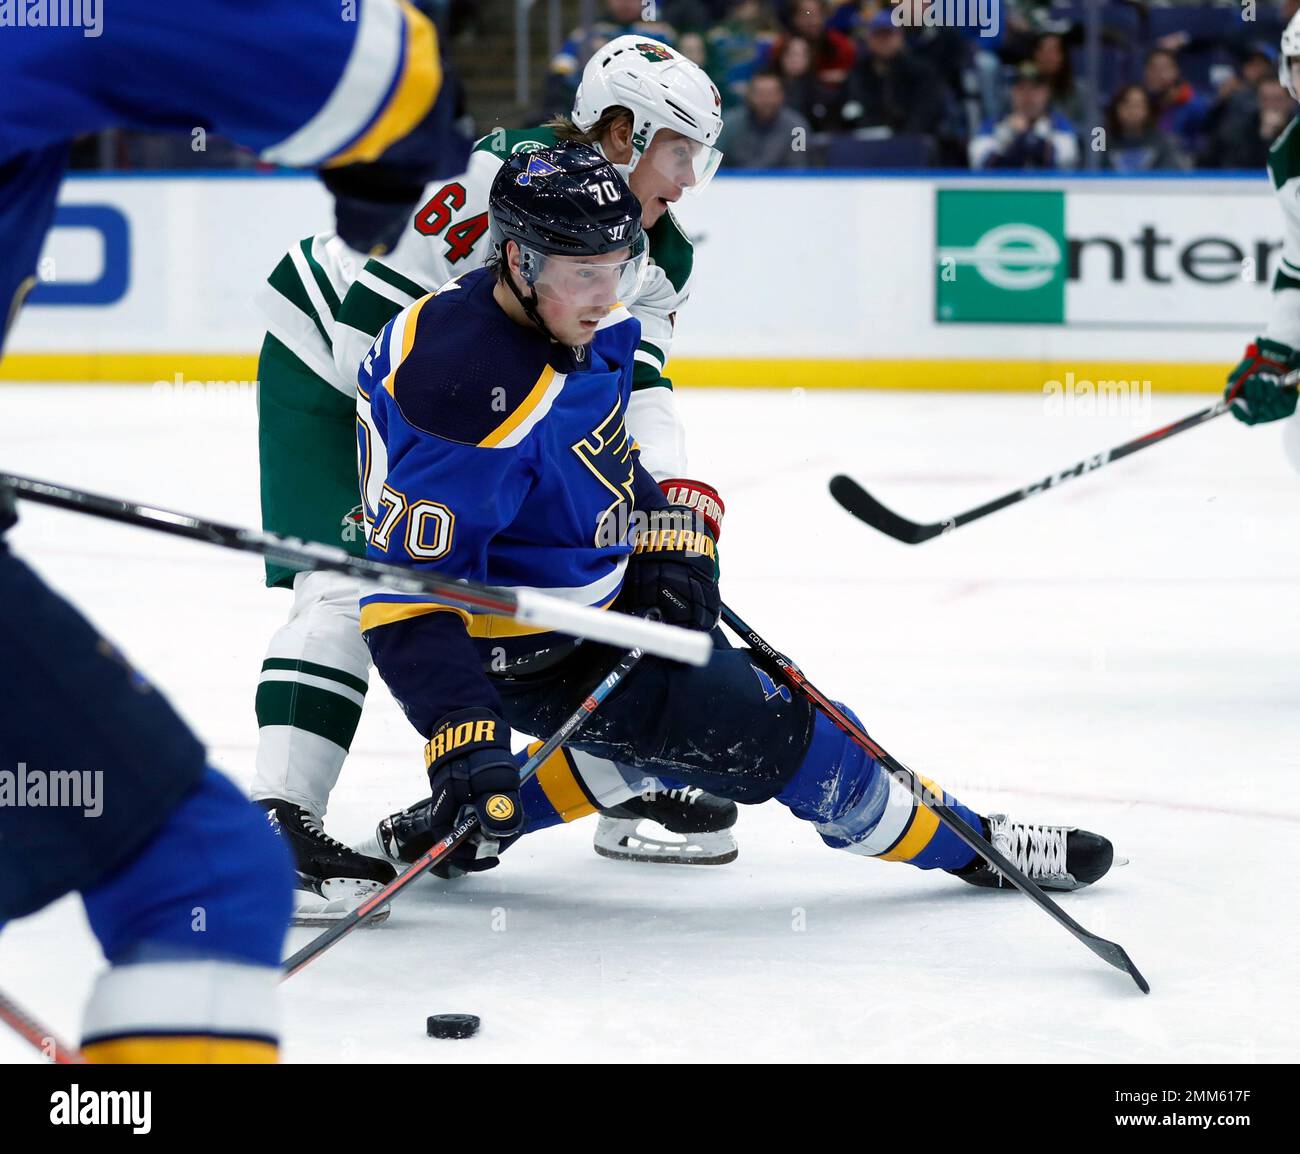 St. Louis Blues' Oskar Sundqvist (70), of Sweden, slips as he brings the  puck downice with Minnesota Wild's Mikael Granlund (64), of Finland, during  the second period of an NHL hockey game